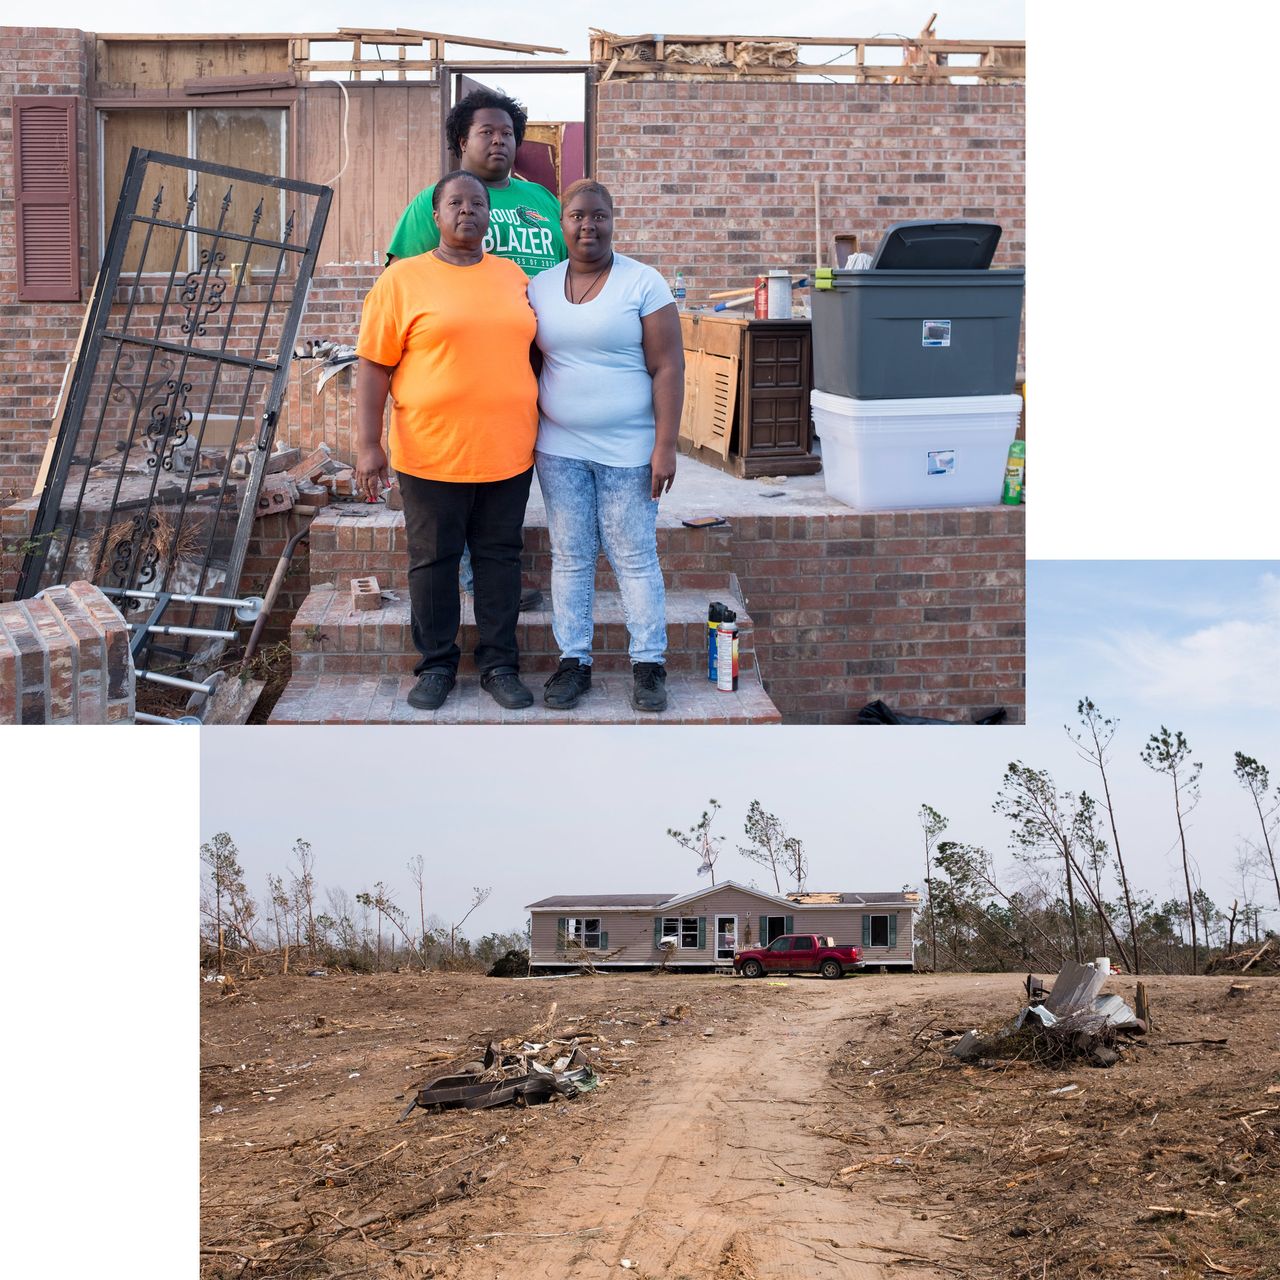 (Top) Rik Tate, in the back, stands with his mother, Brenda Tate, and sister, Tiy Aus Dia Tate, outside of their home that was damaged during last month's tornado-producing storm. (Bottom) A home off of Lee Road 38 was moved from its foundation and heavily damaged by the tornado.